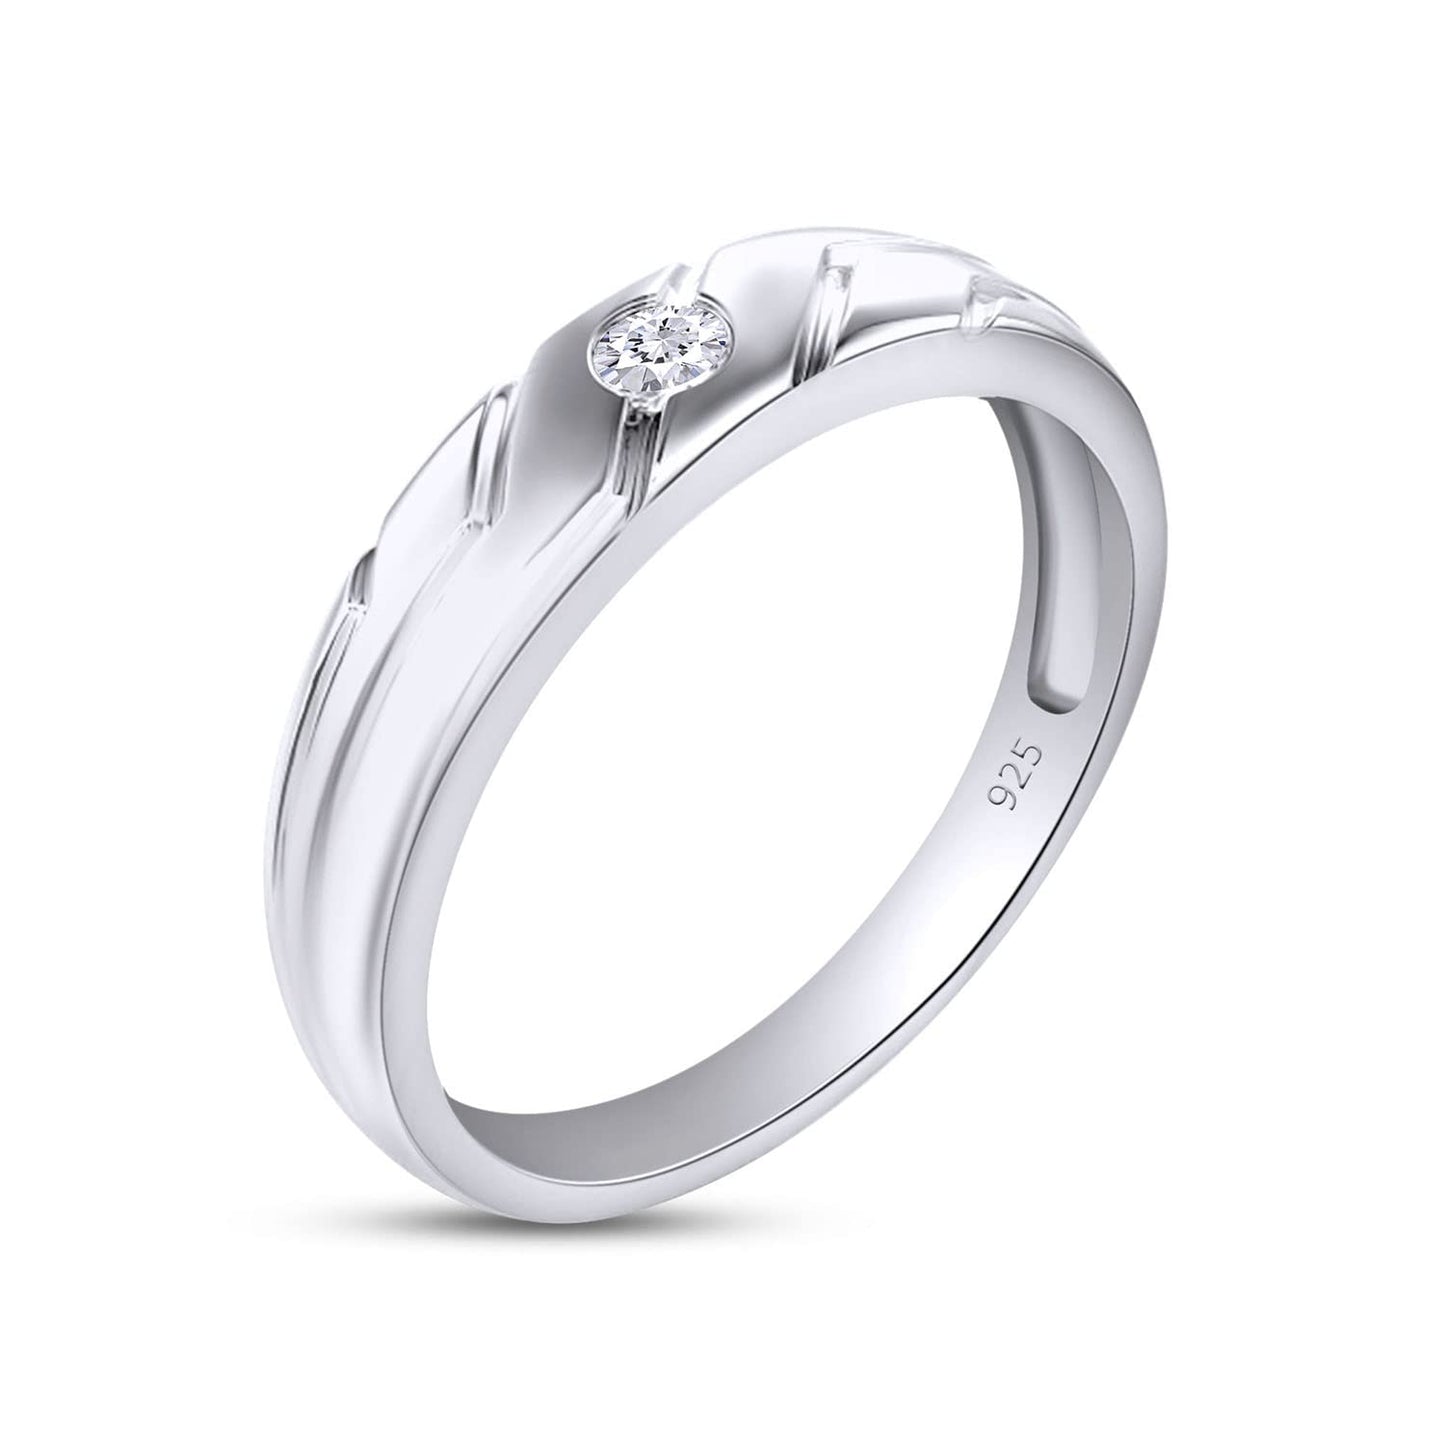 1/20 Carat Round Cut Lab Created Moissanite Diamond Men's Engagement Wedding Ring In 925 Sterling Silver (0.05 Cttw)